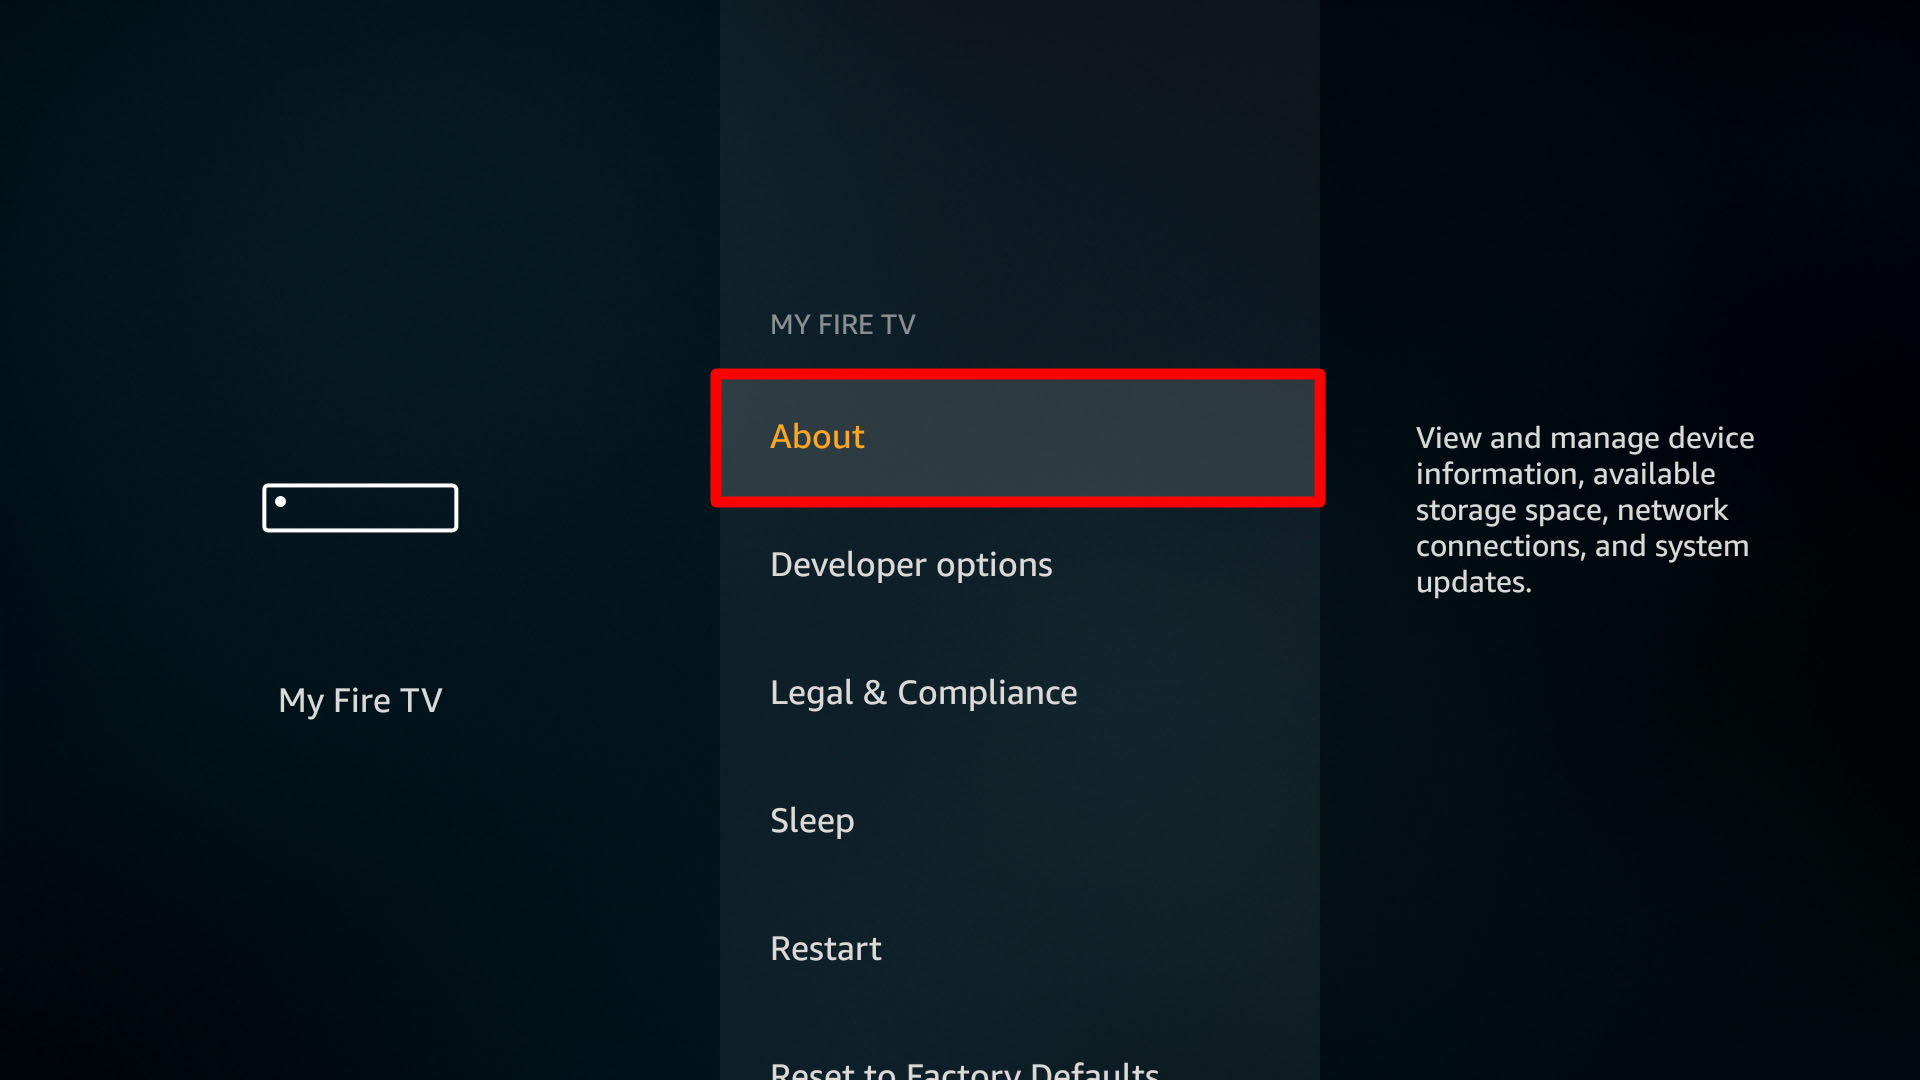 Scroll to the right and choose "My Fire TV."
Select "Restart" and confirm your selection.